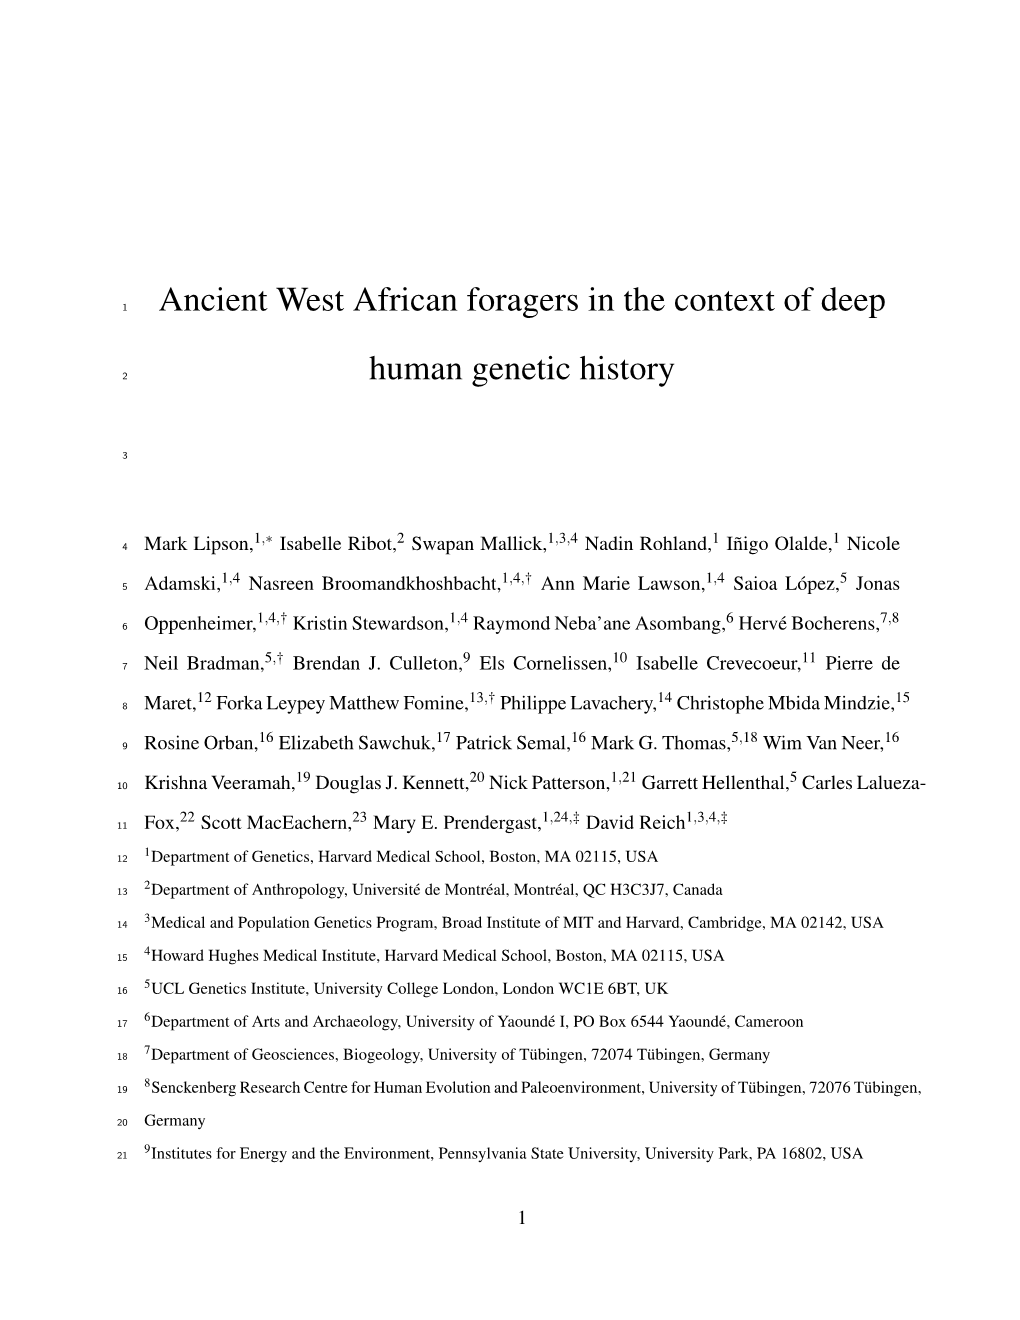 Ancient West African Foragers in the Context of Deep Human Genetic History